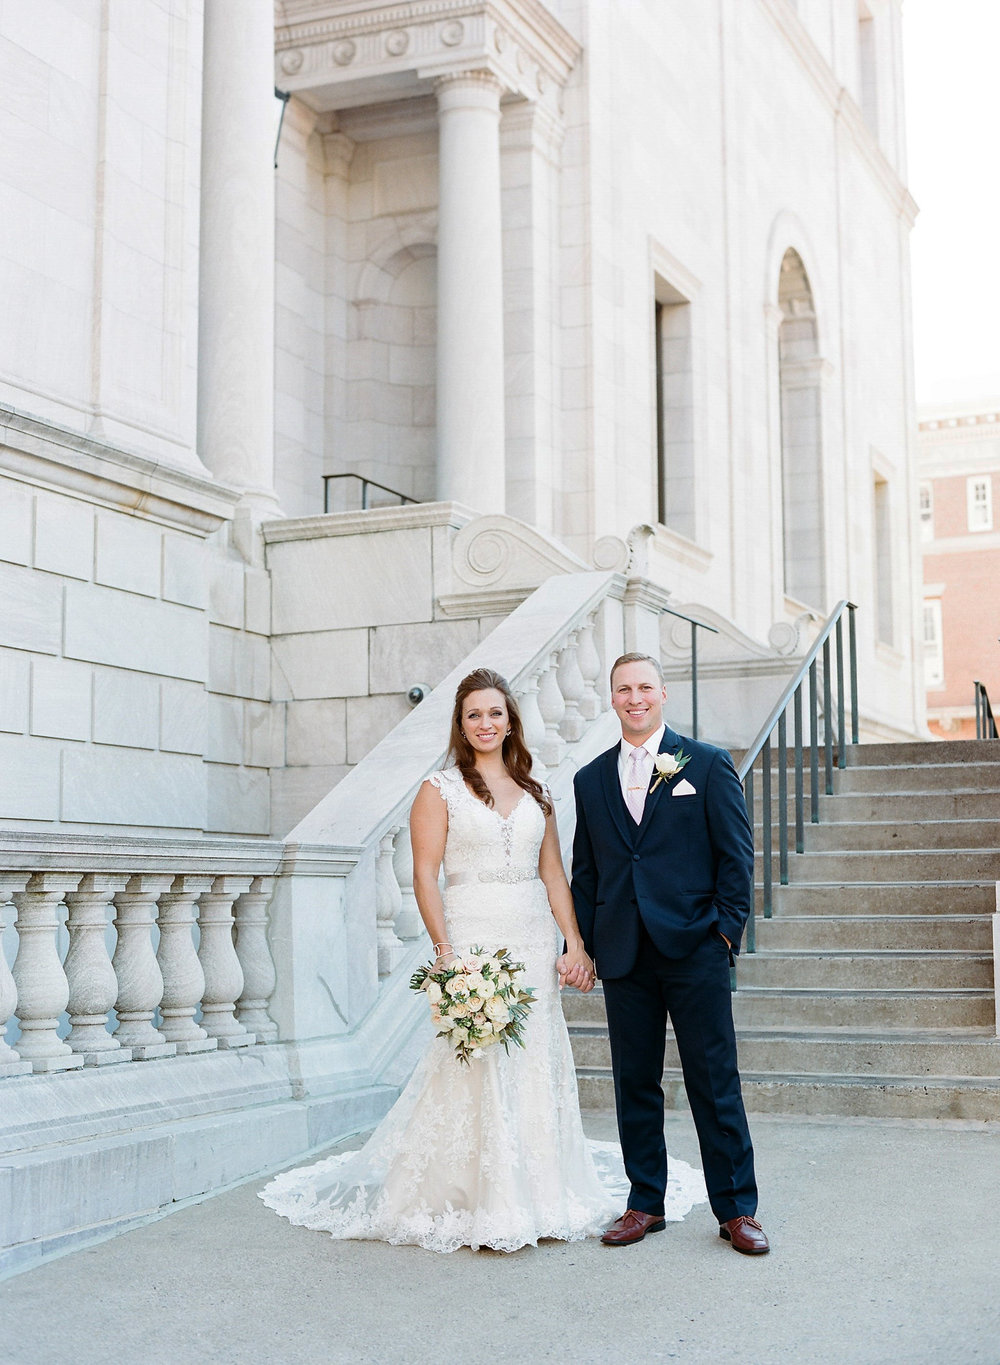 Bride and groom outside their wedding at the Landmark Center in St Paul